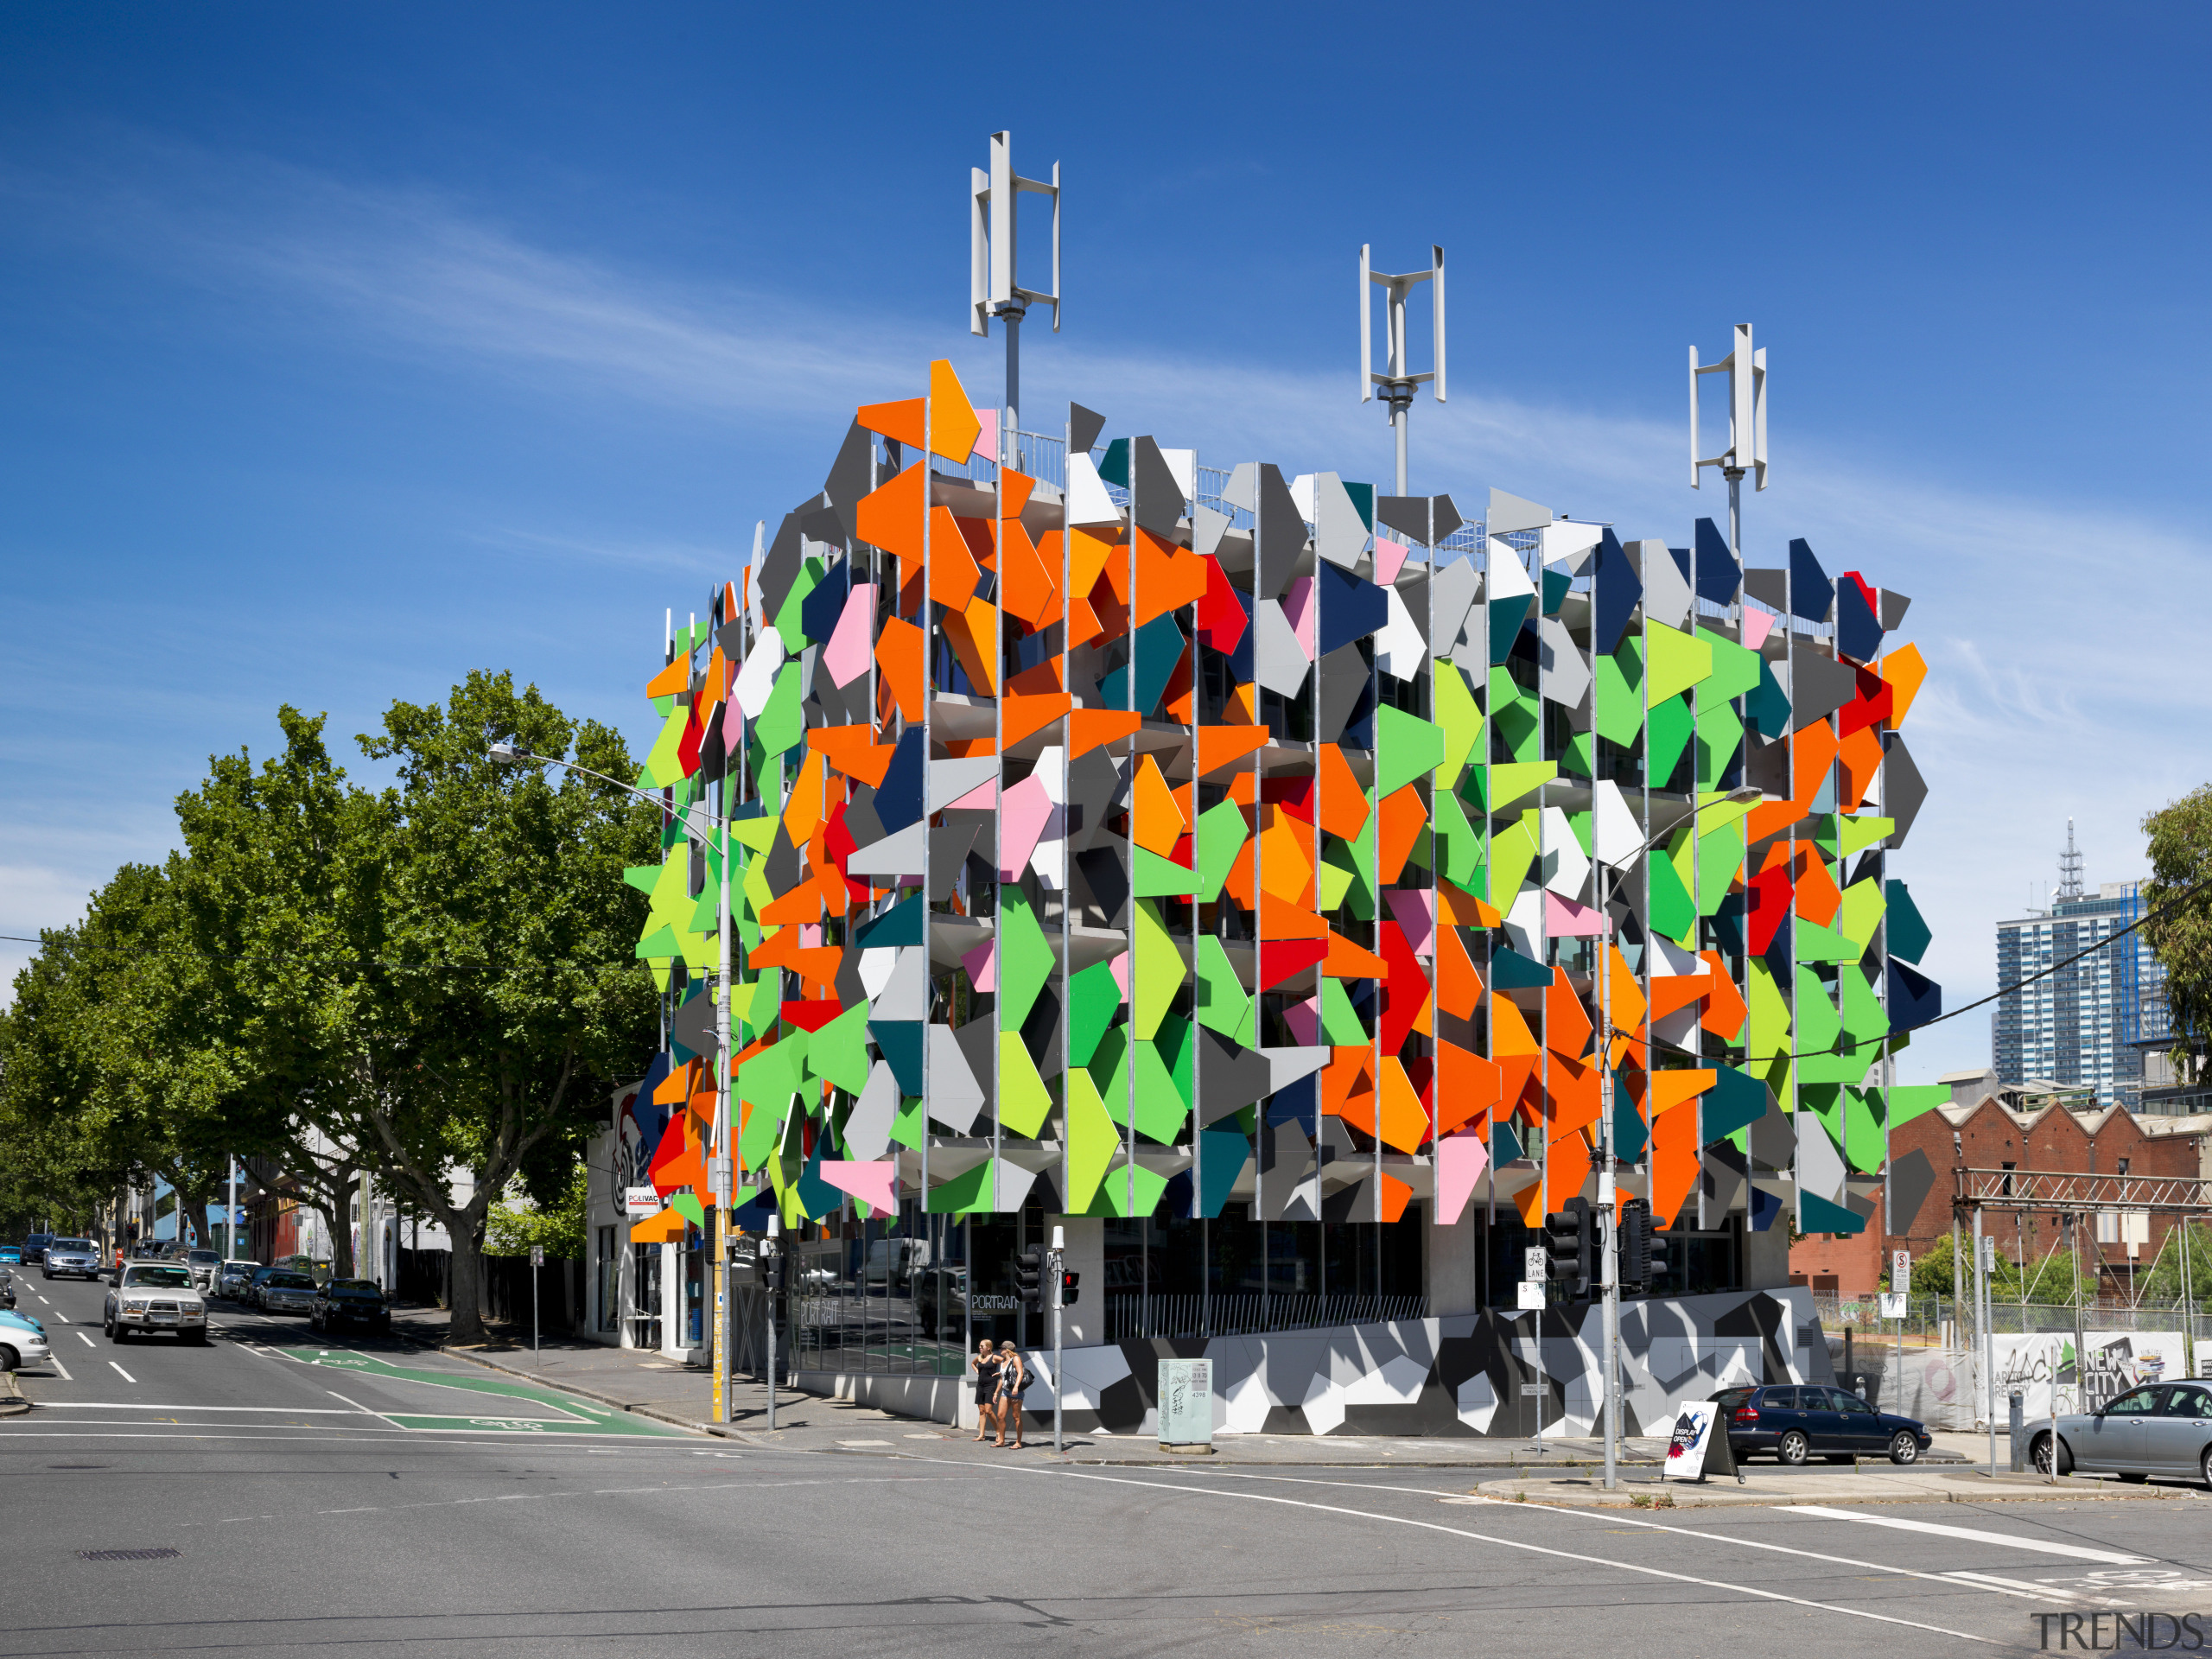 View of Pixel Building, with colorful exterior flags, mural, tree